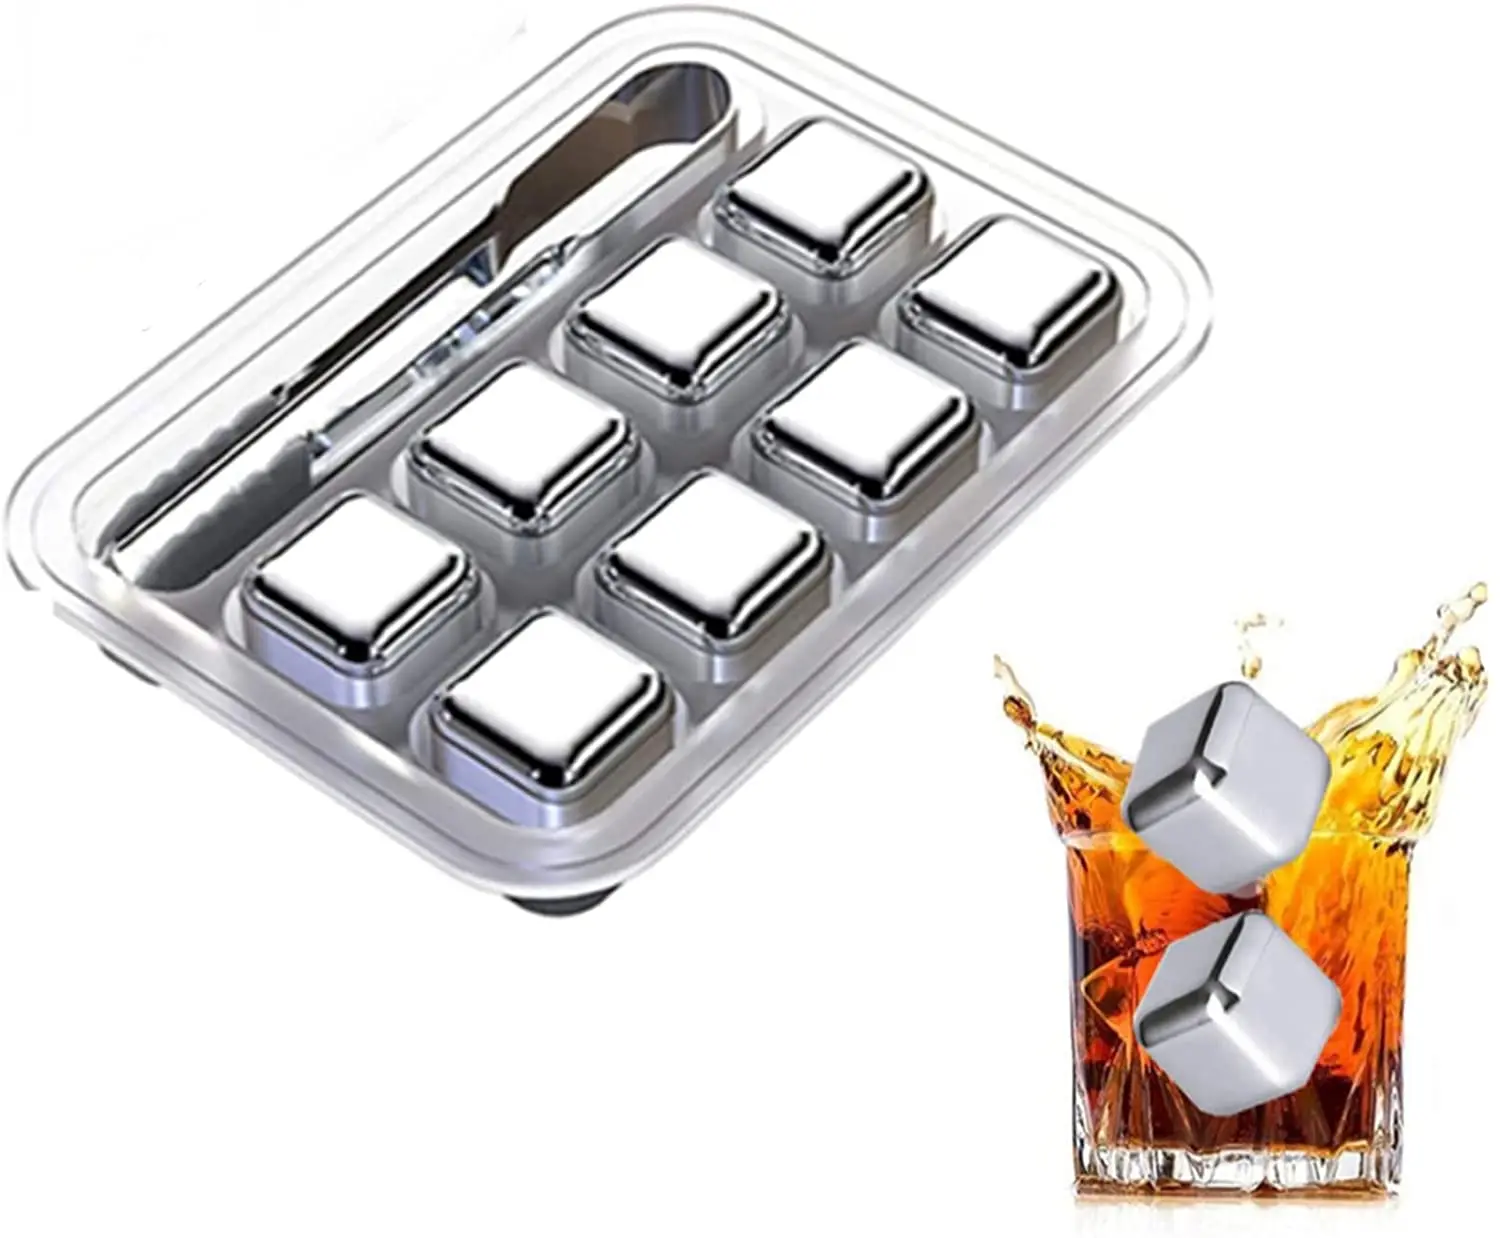 

Exclusive Stainless Steel Whiskey Reusable Ice Cubes Chilling Stones Beverage Rocks 8 Piece Gift Set with Tongs Bars Accessories, Silver